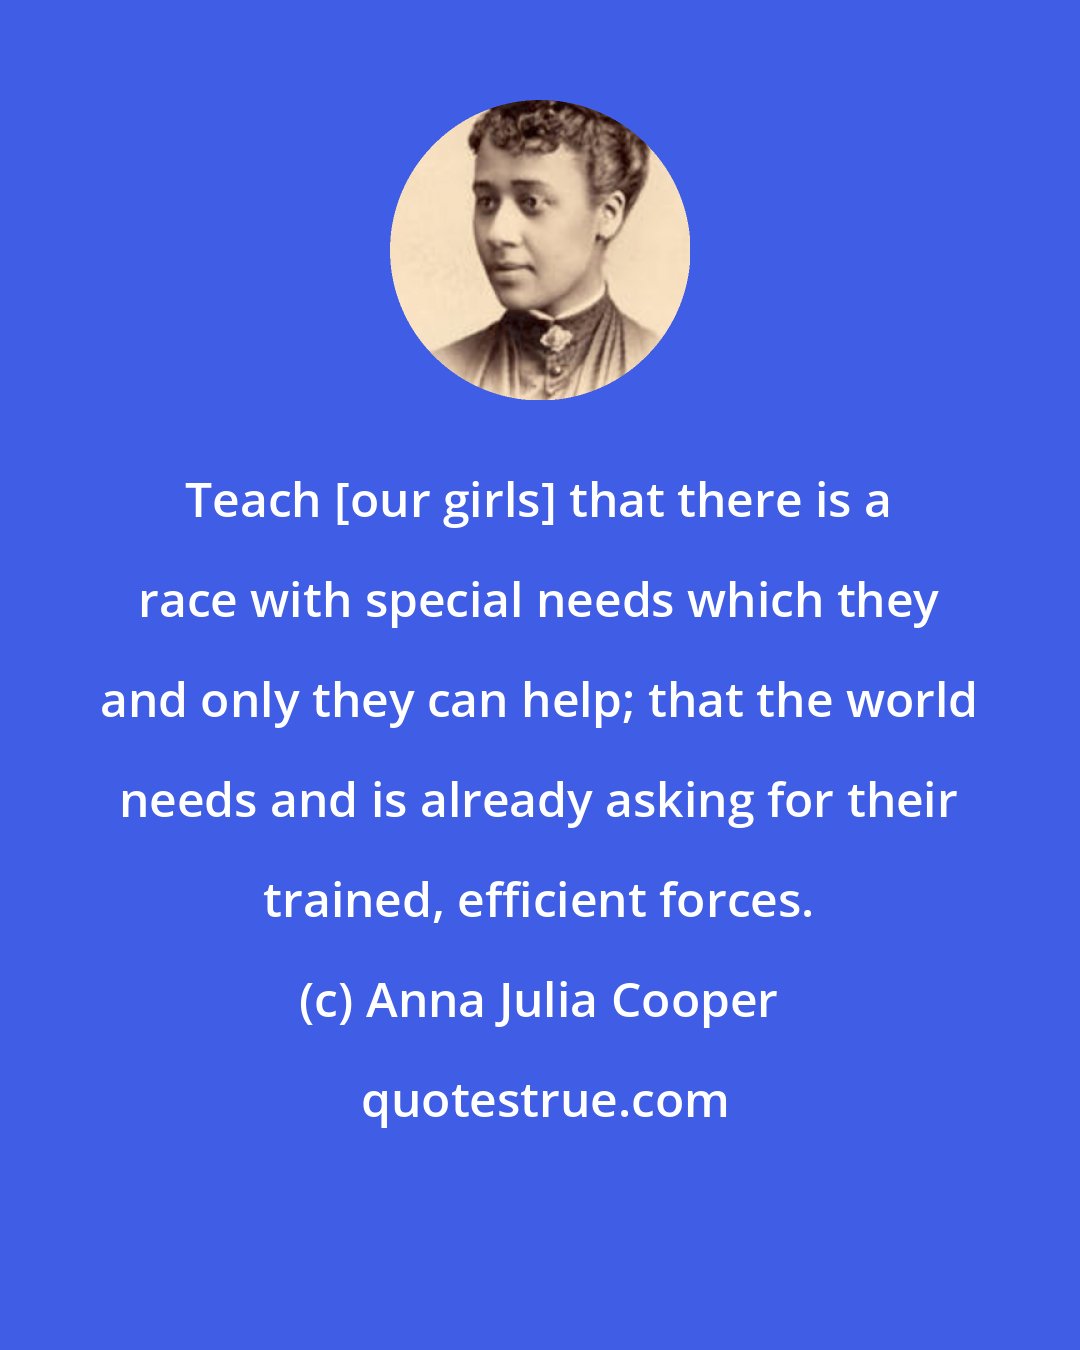 Anna Julia Cooper: Teach [our girls] that there is a race with special needs which they and only they can help; that the world needs and is already asking for their trained, efficient forces.